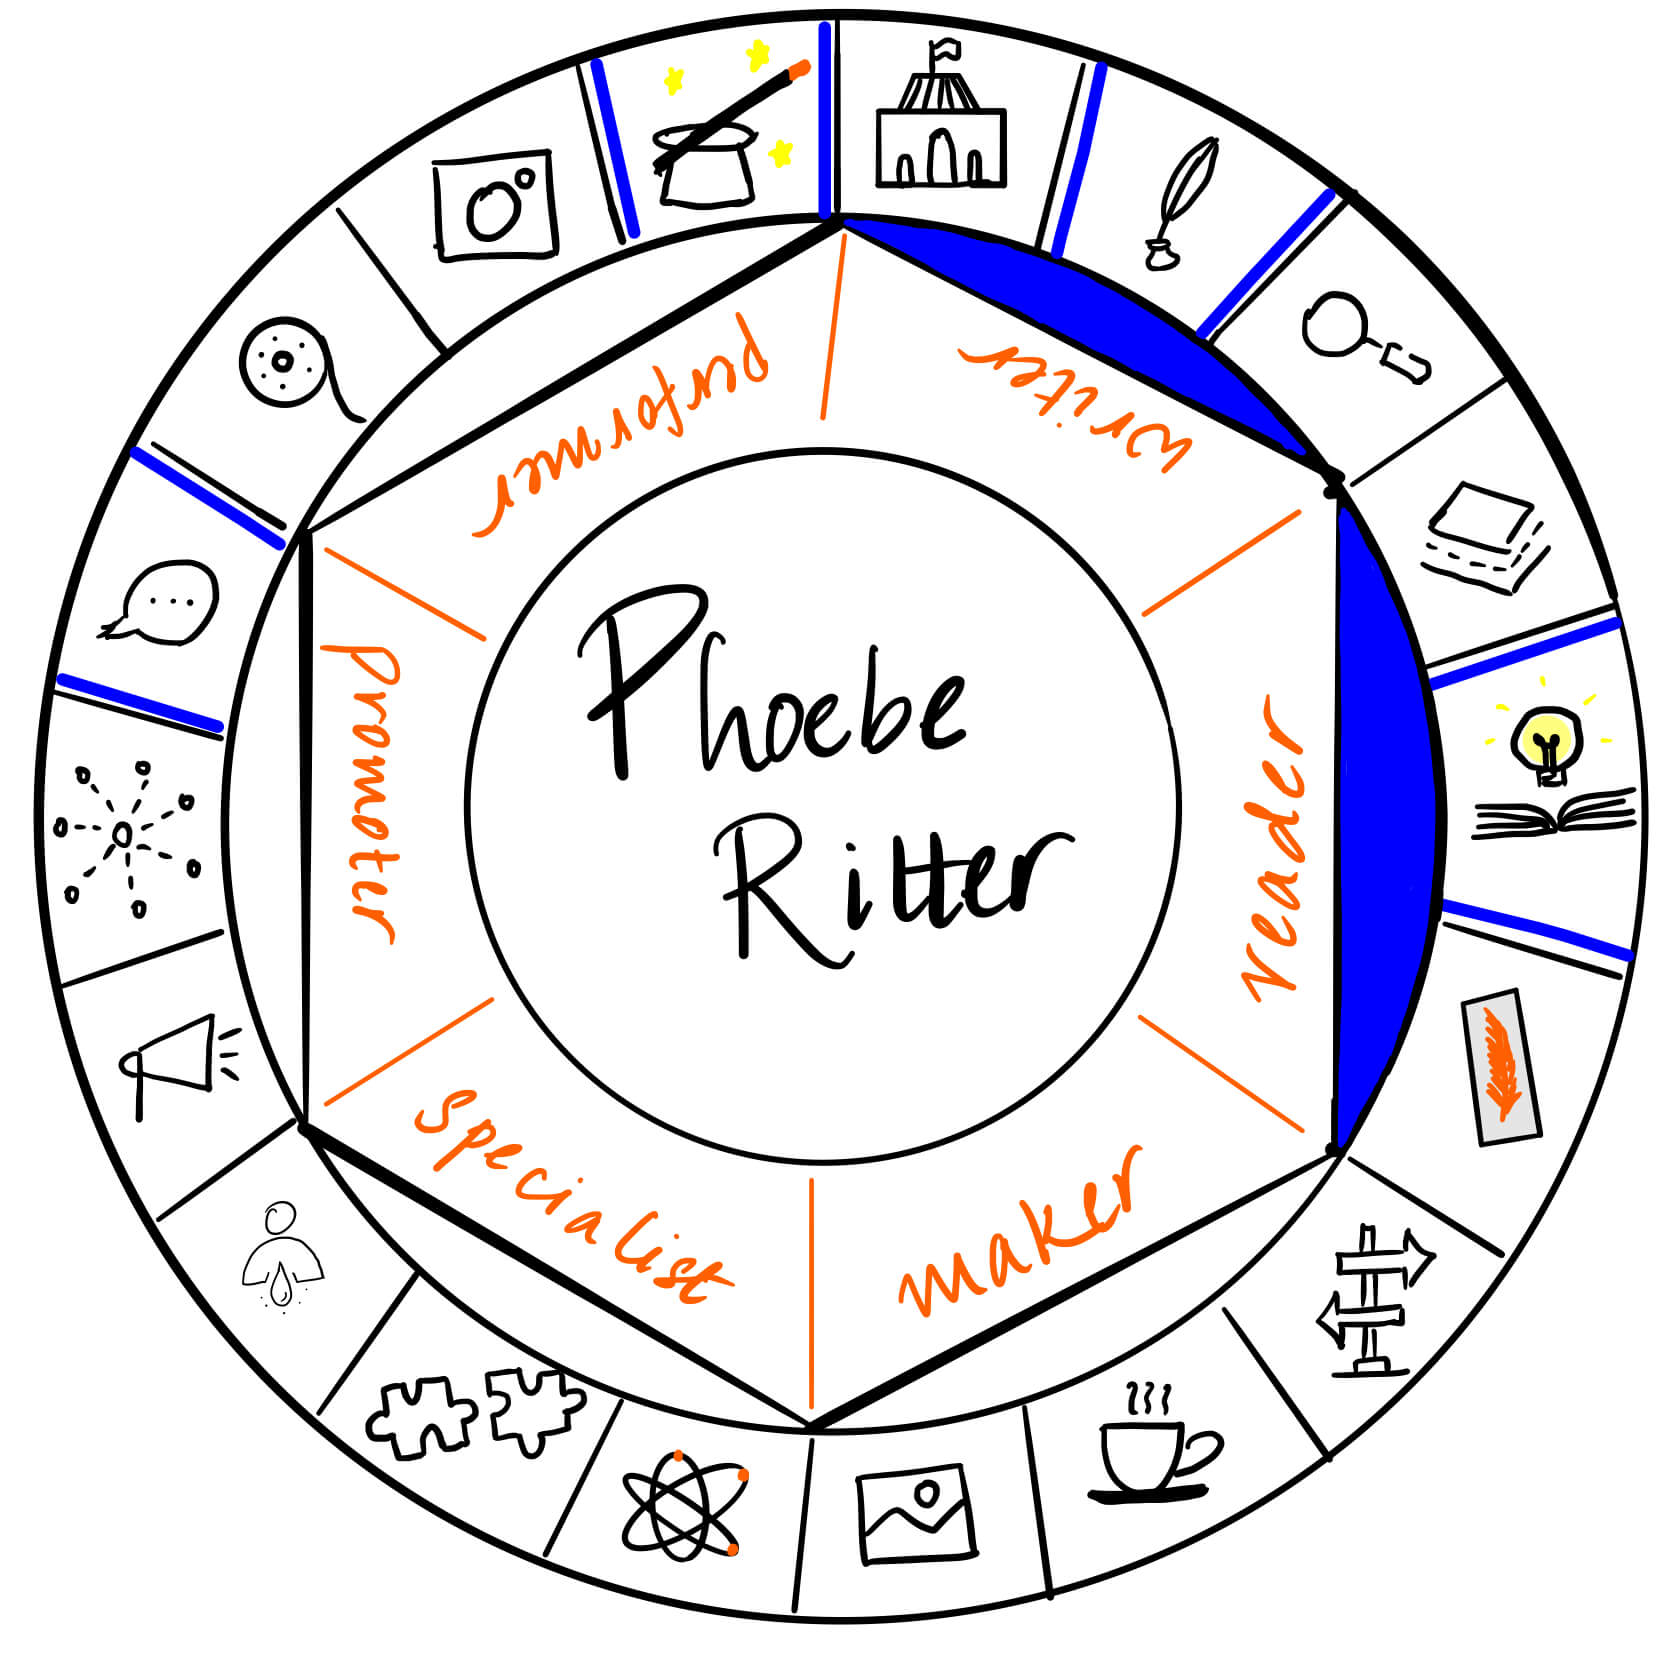 Phoebe Ritter is a reader and writer. It's a pleasure to have her over on The Creator's Roulette to talk about working with beta readers.